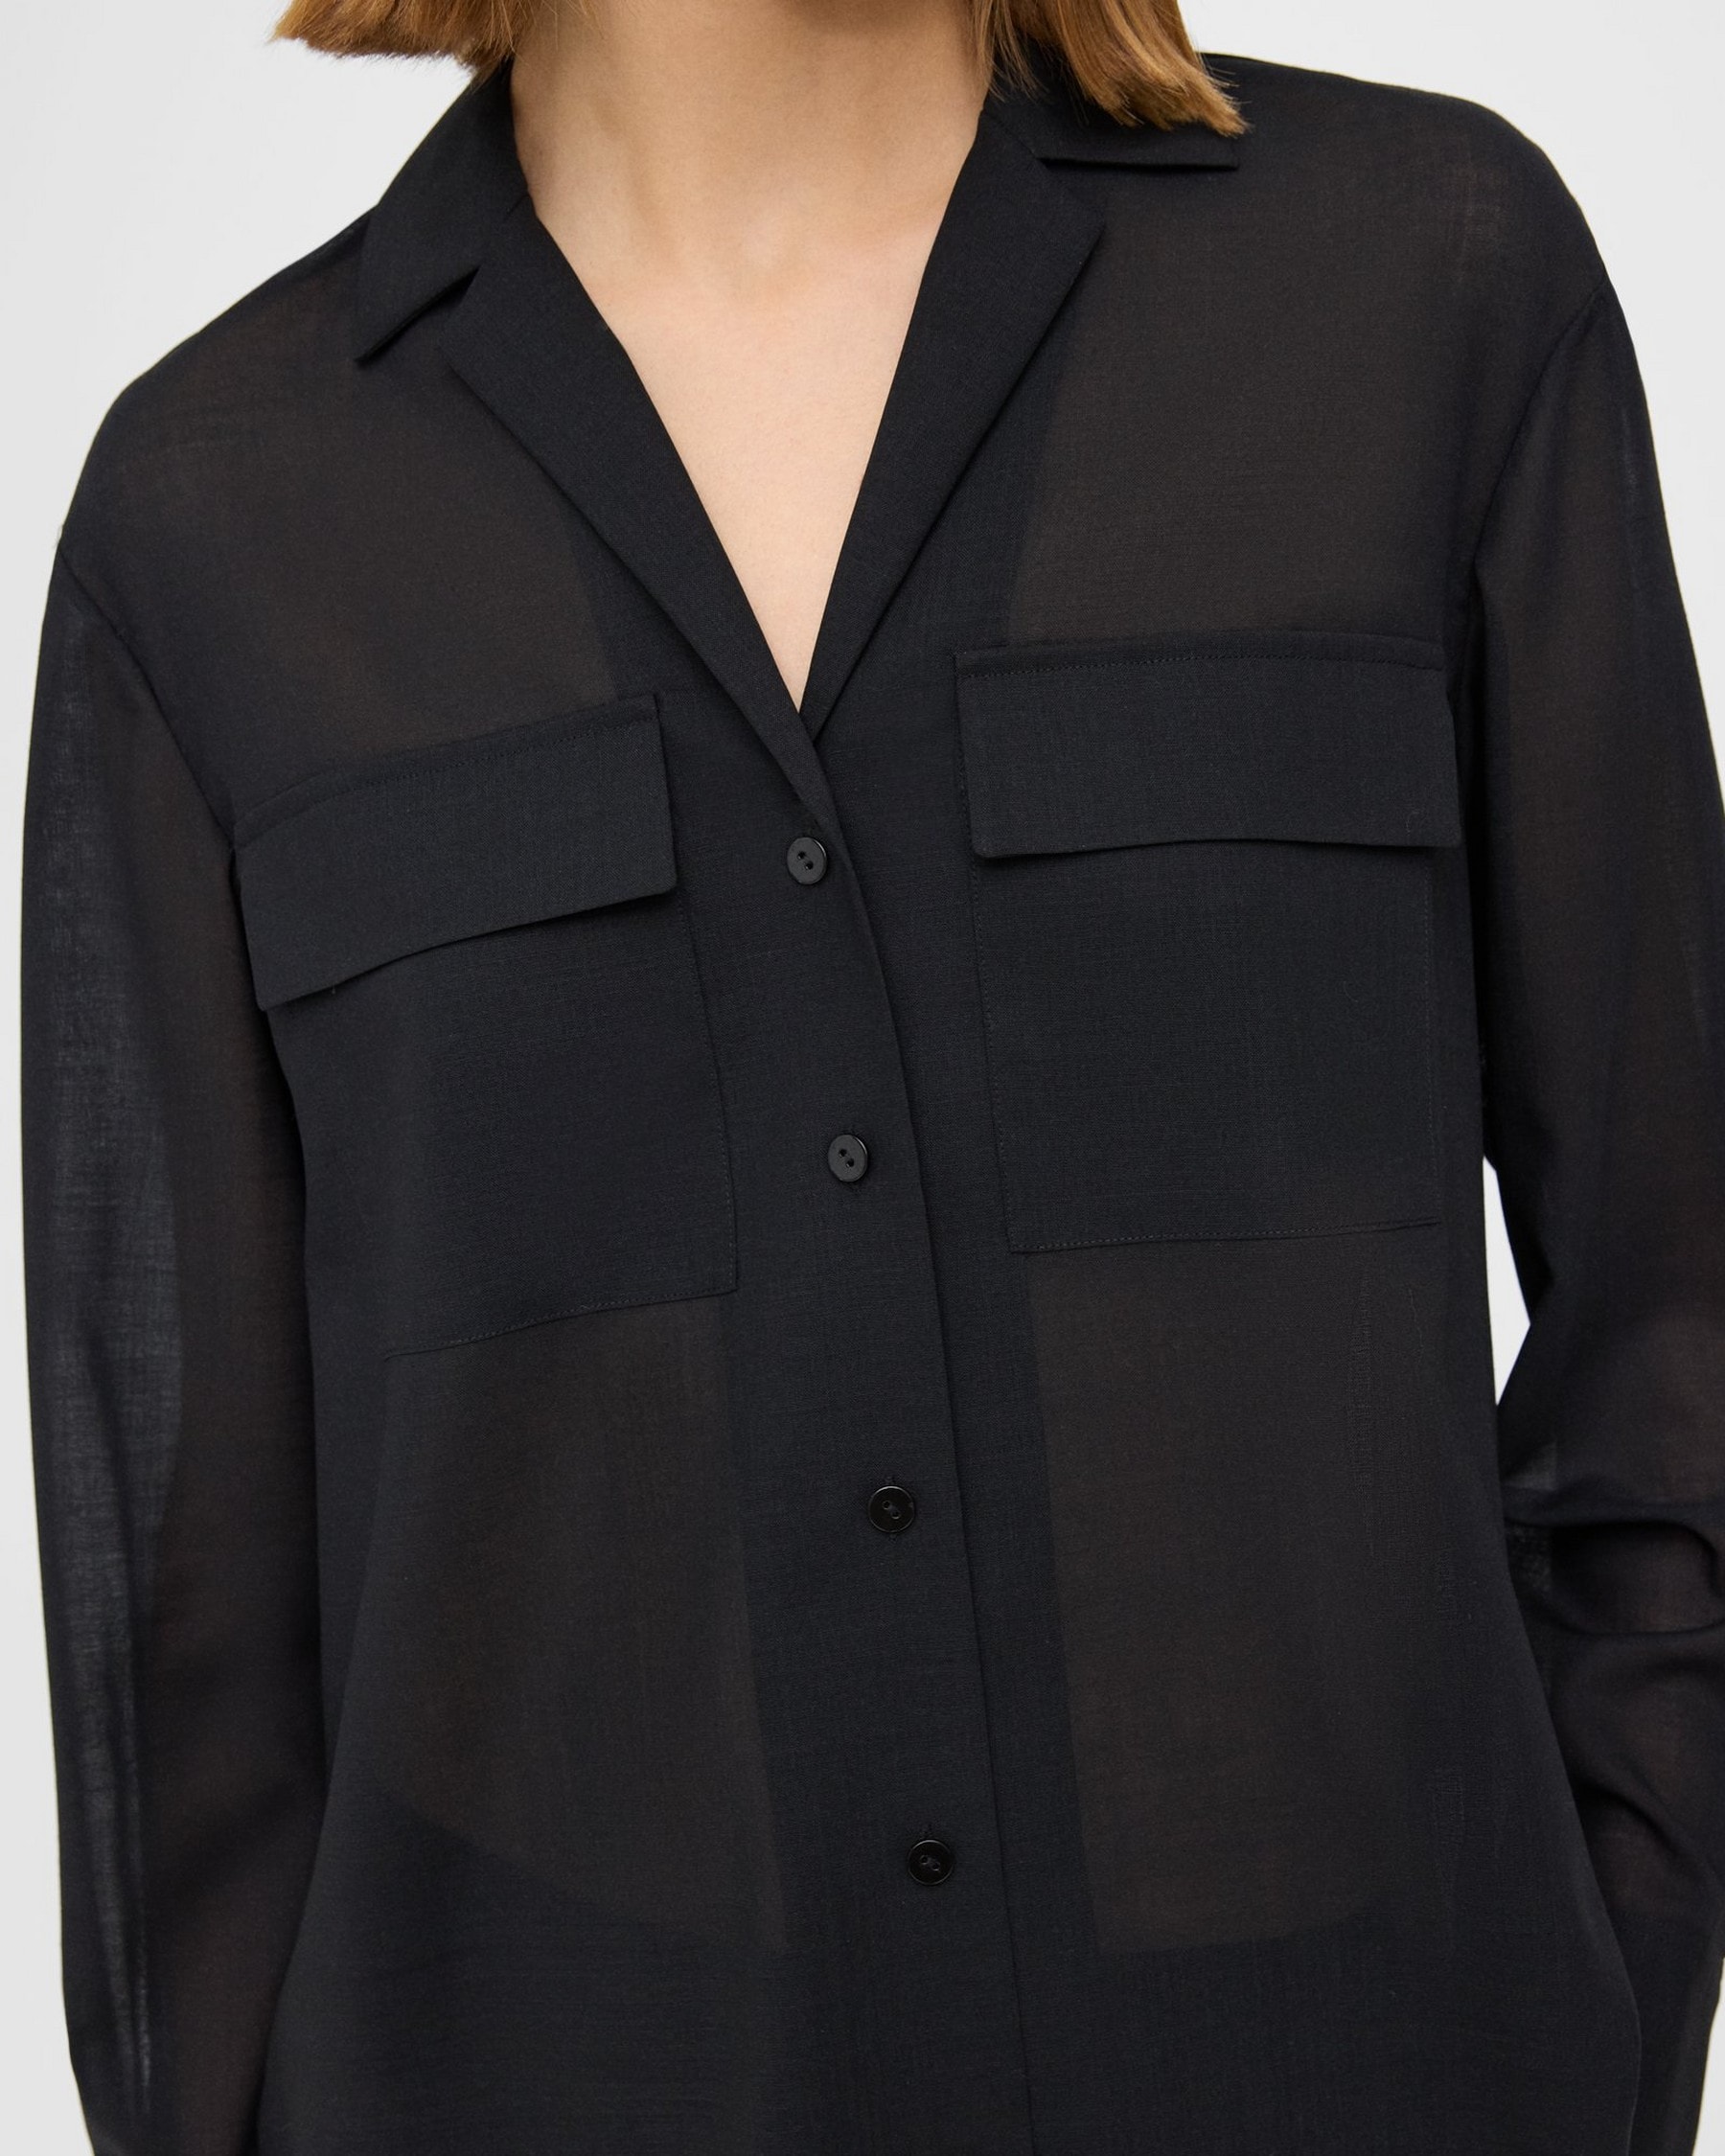 Oversized Patch Pocket Shirt in Cotton